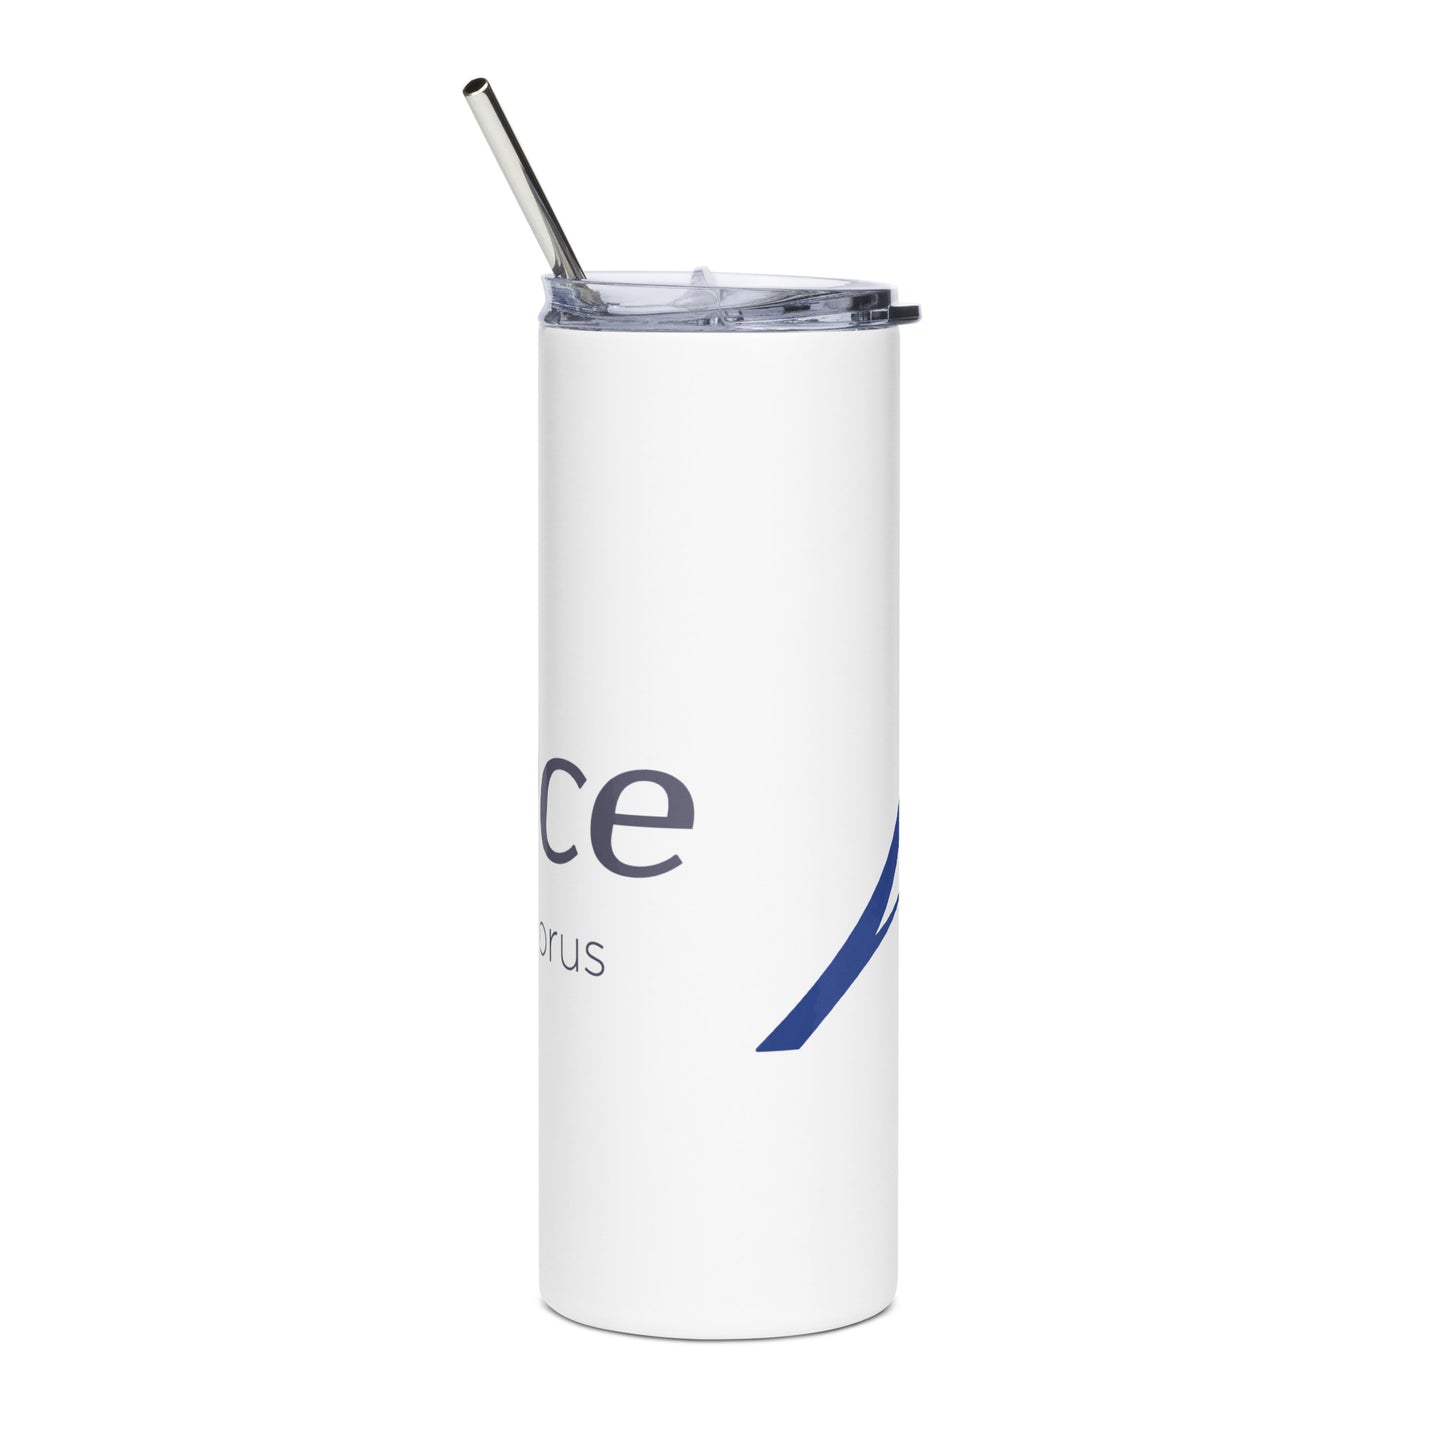 The Alliance - Printed Stainless steel tumbler